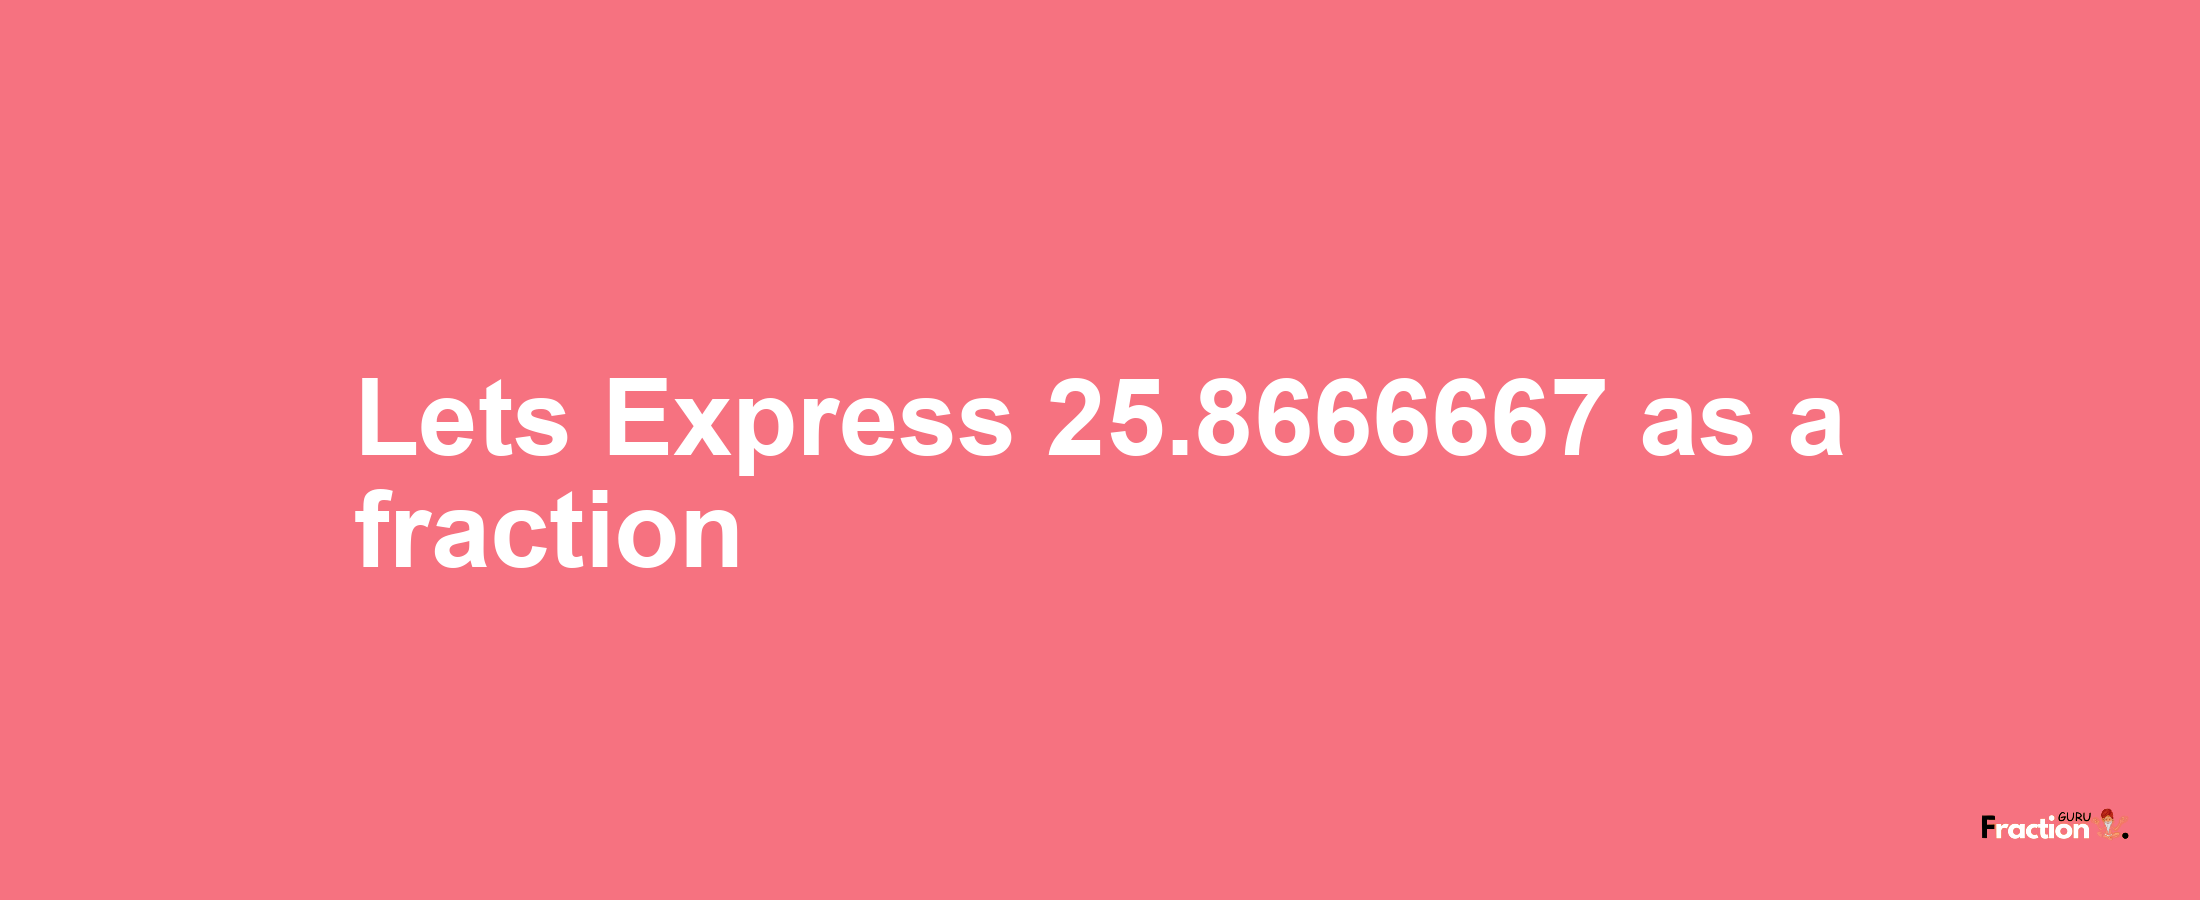 Lets Express 25.8666667 as afraction